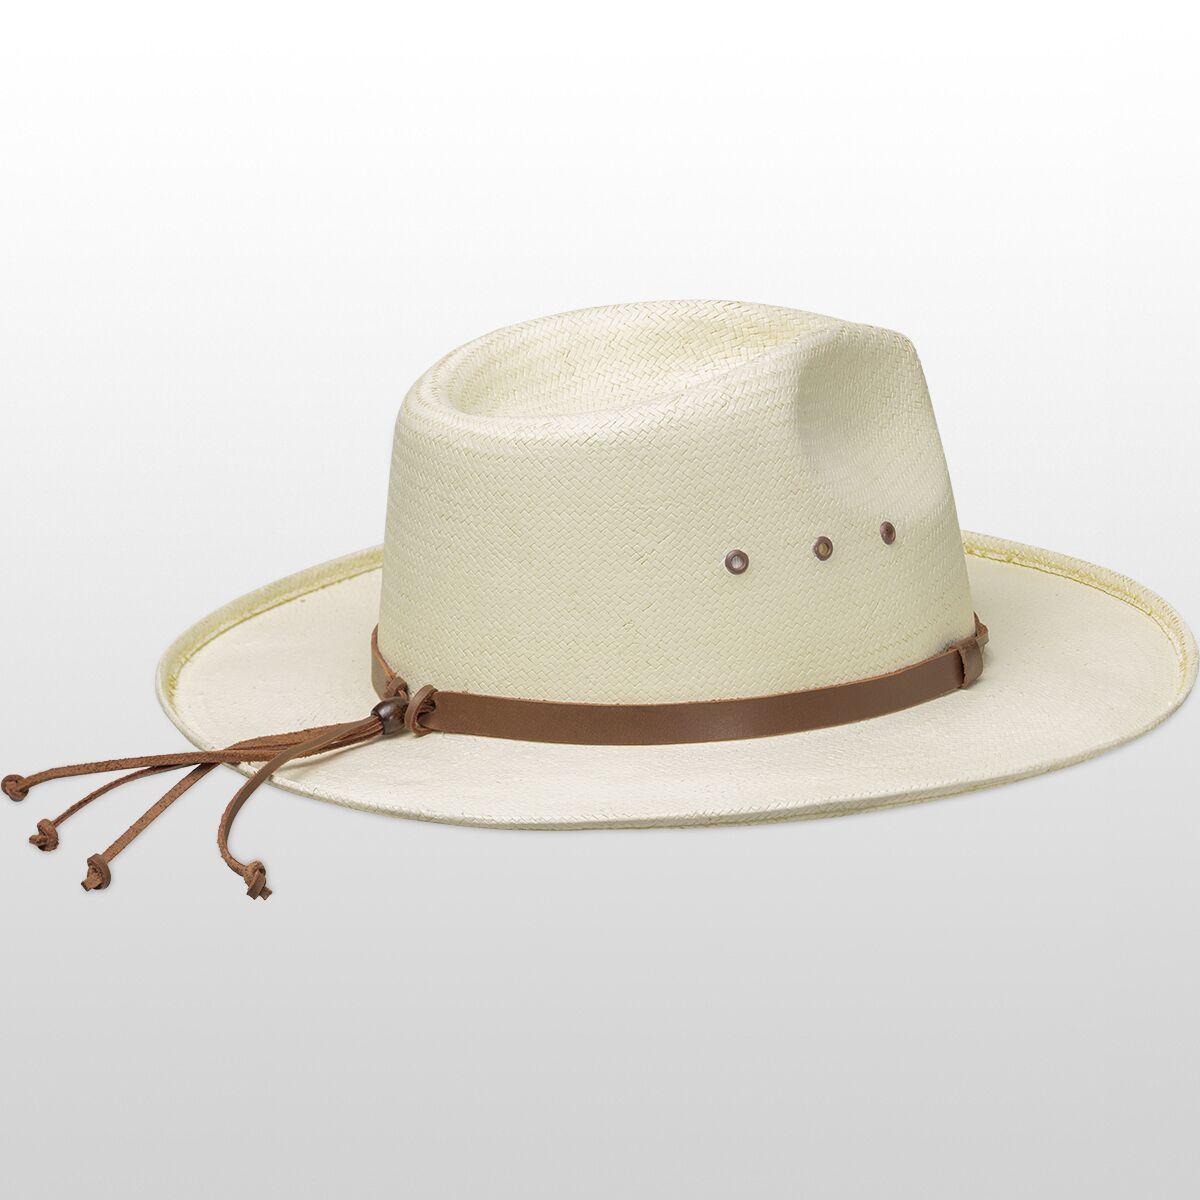 Stetson, Los Alamos Outback Straw Hat